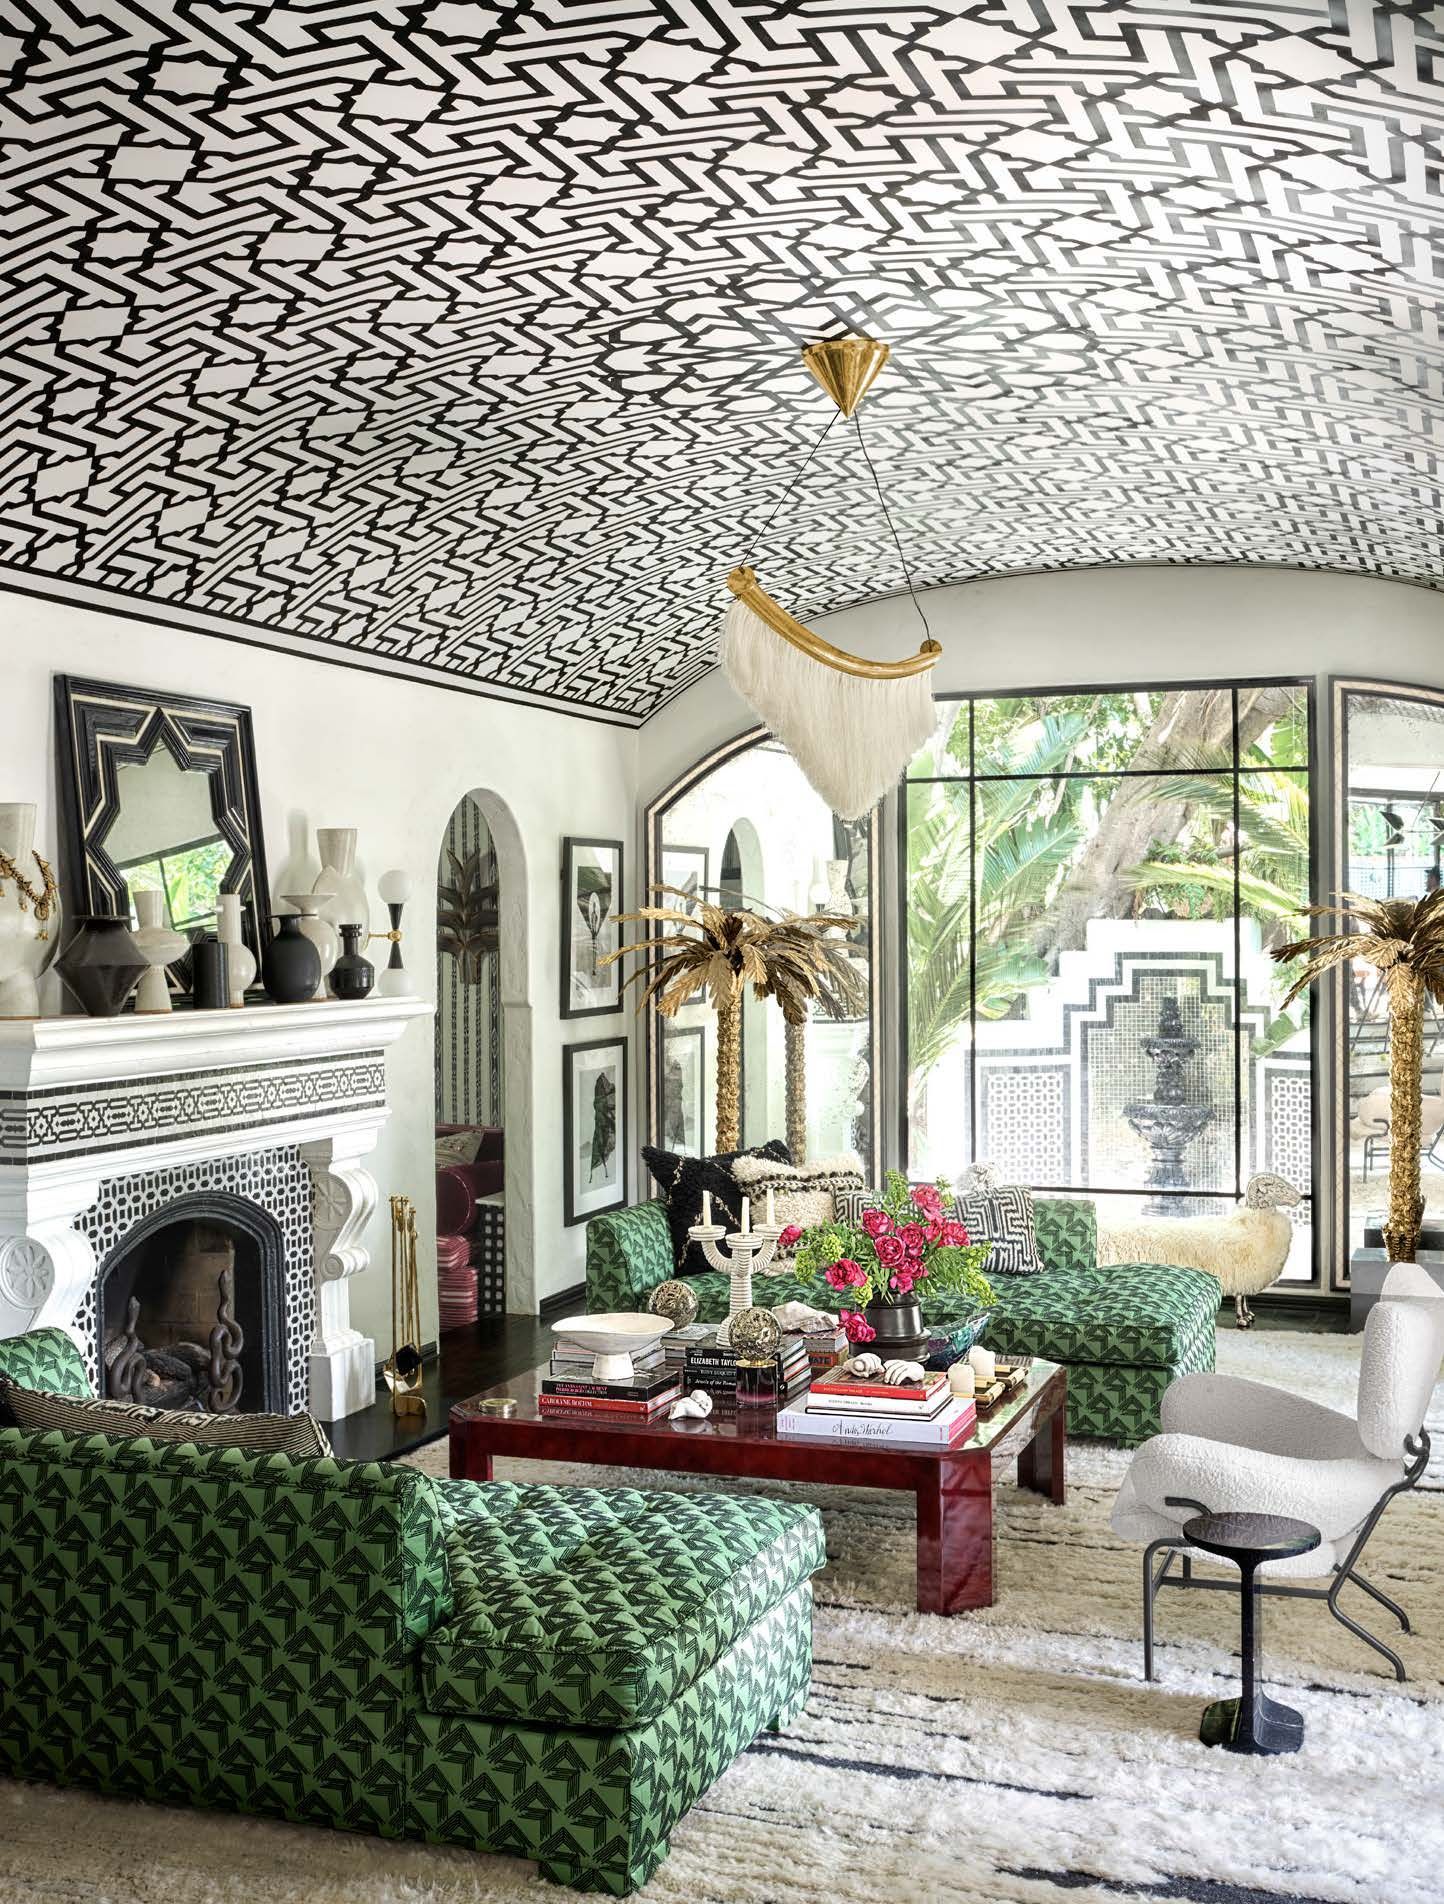 Patterned. +70 Unique Ceiling Design Ideas for Your Living Room